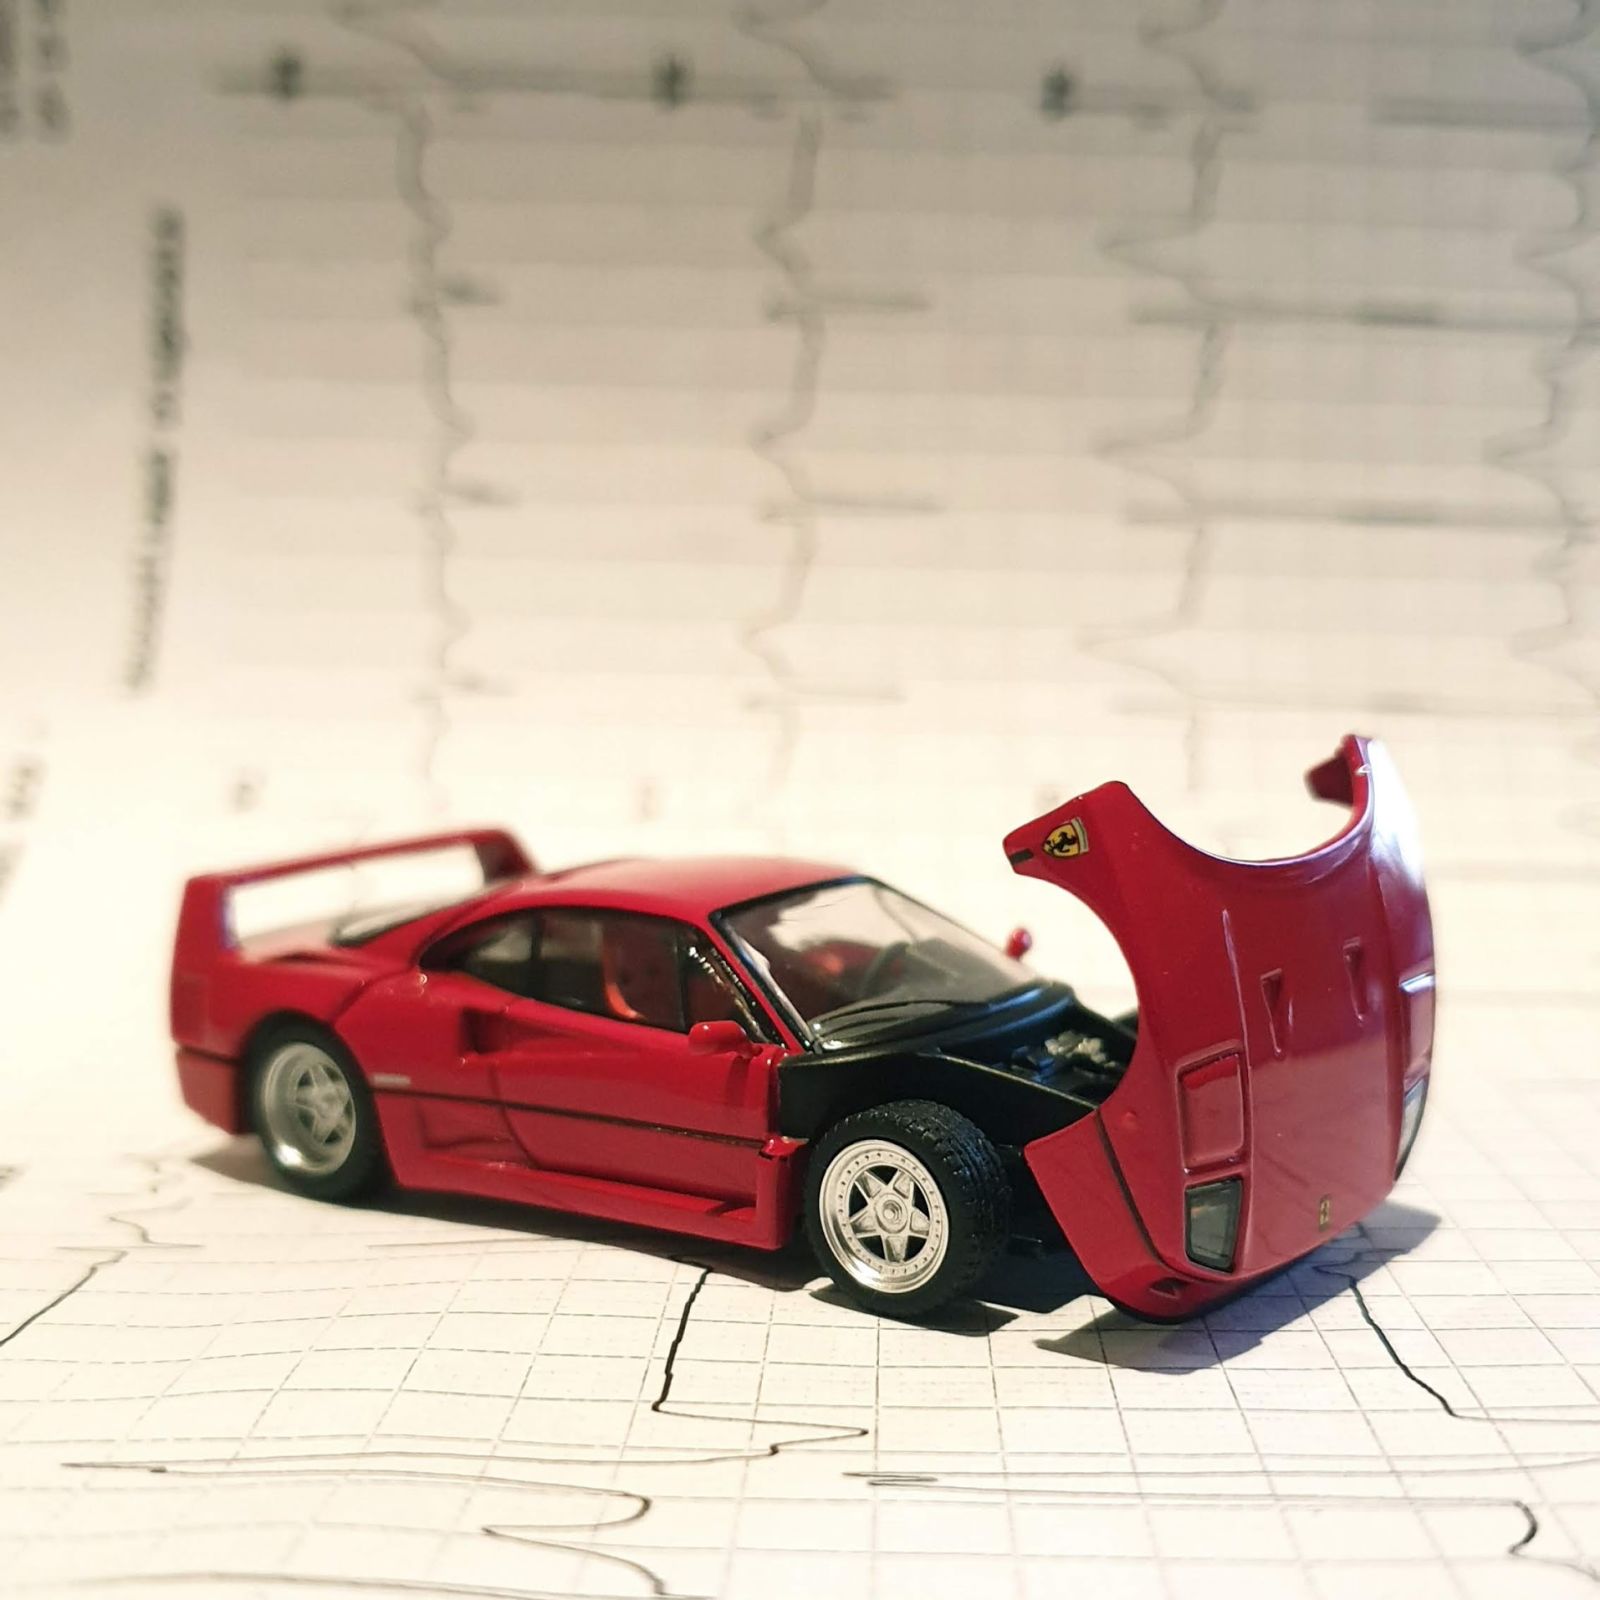 Illustration for article titled I now own a Ferrari F40